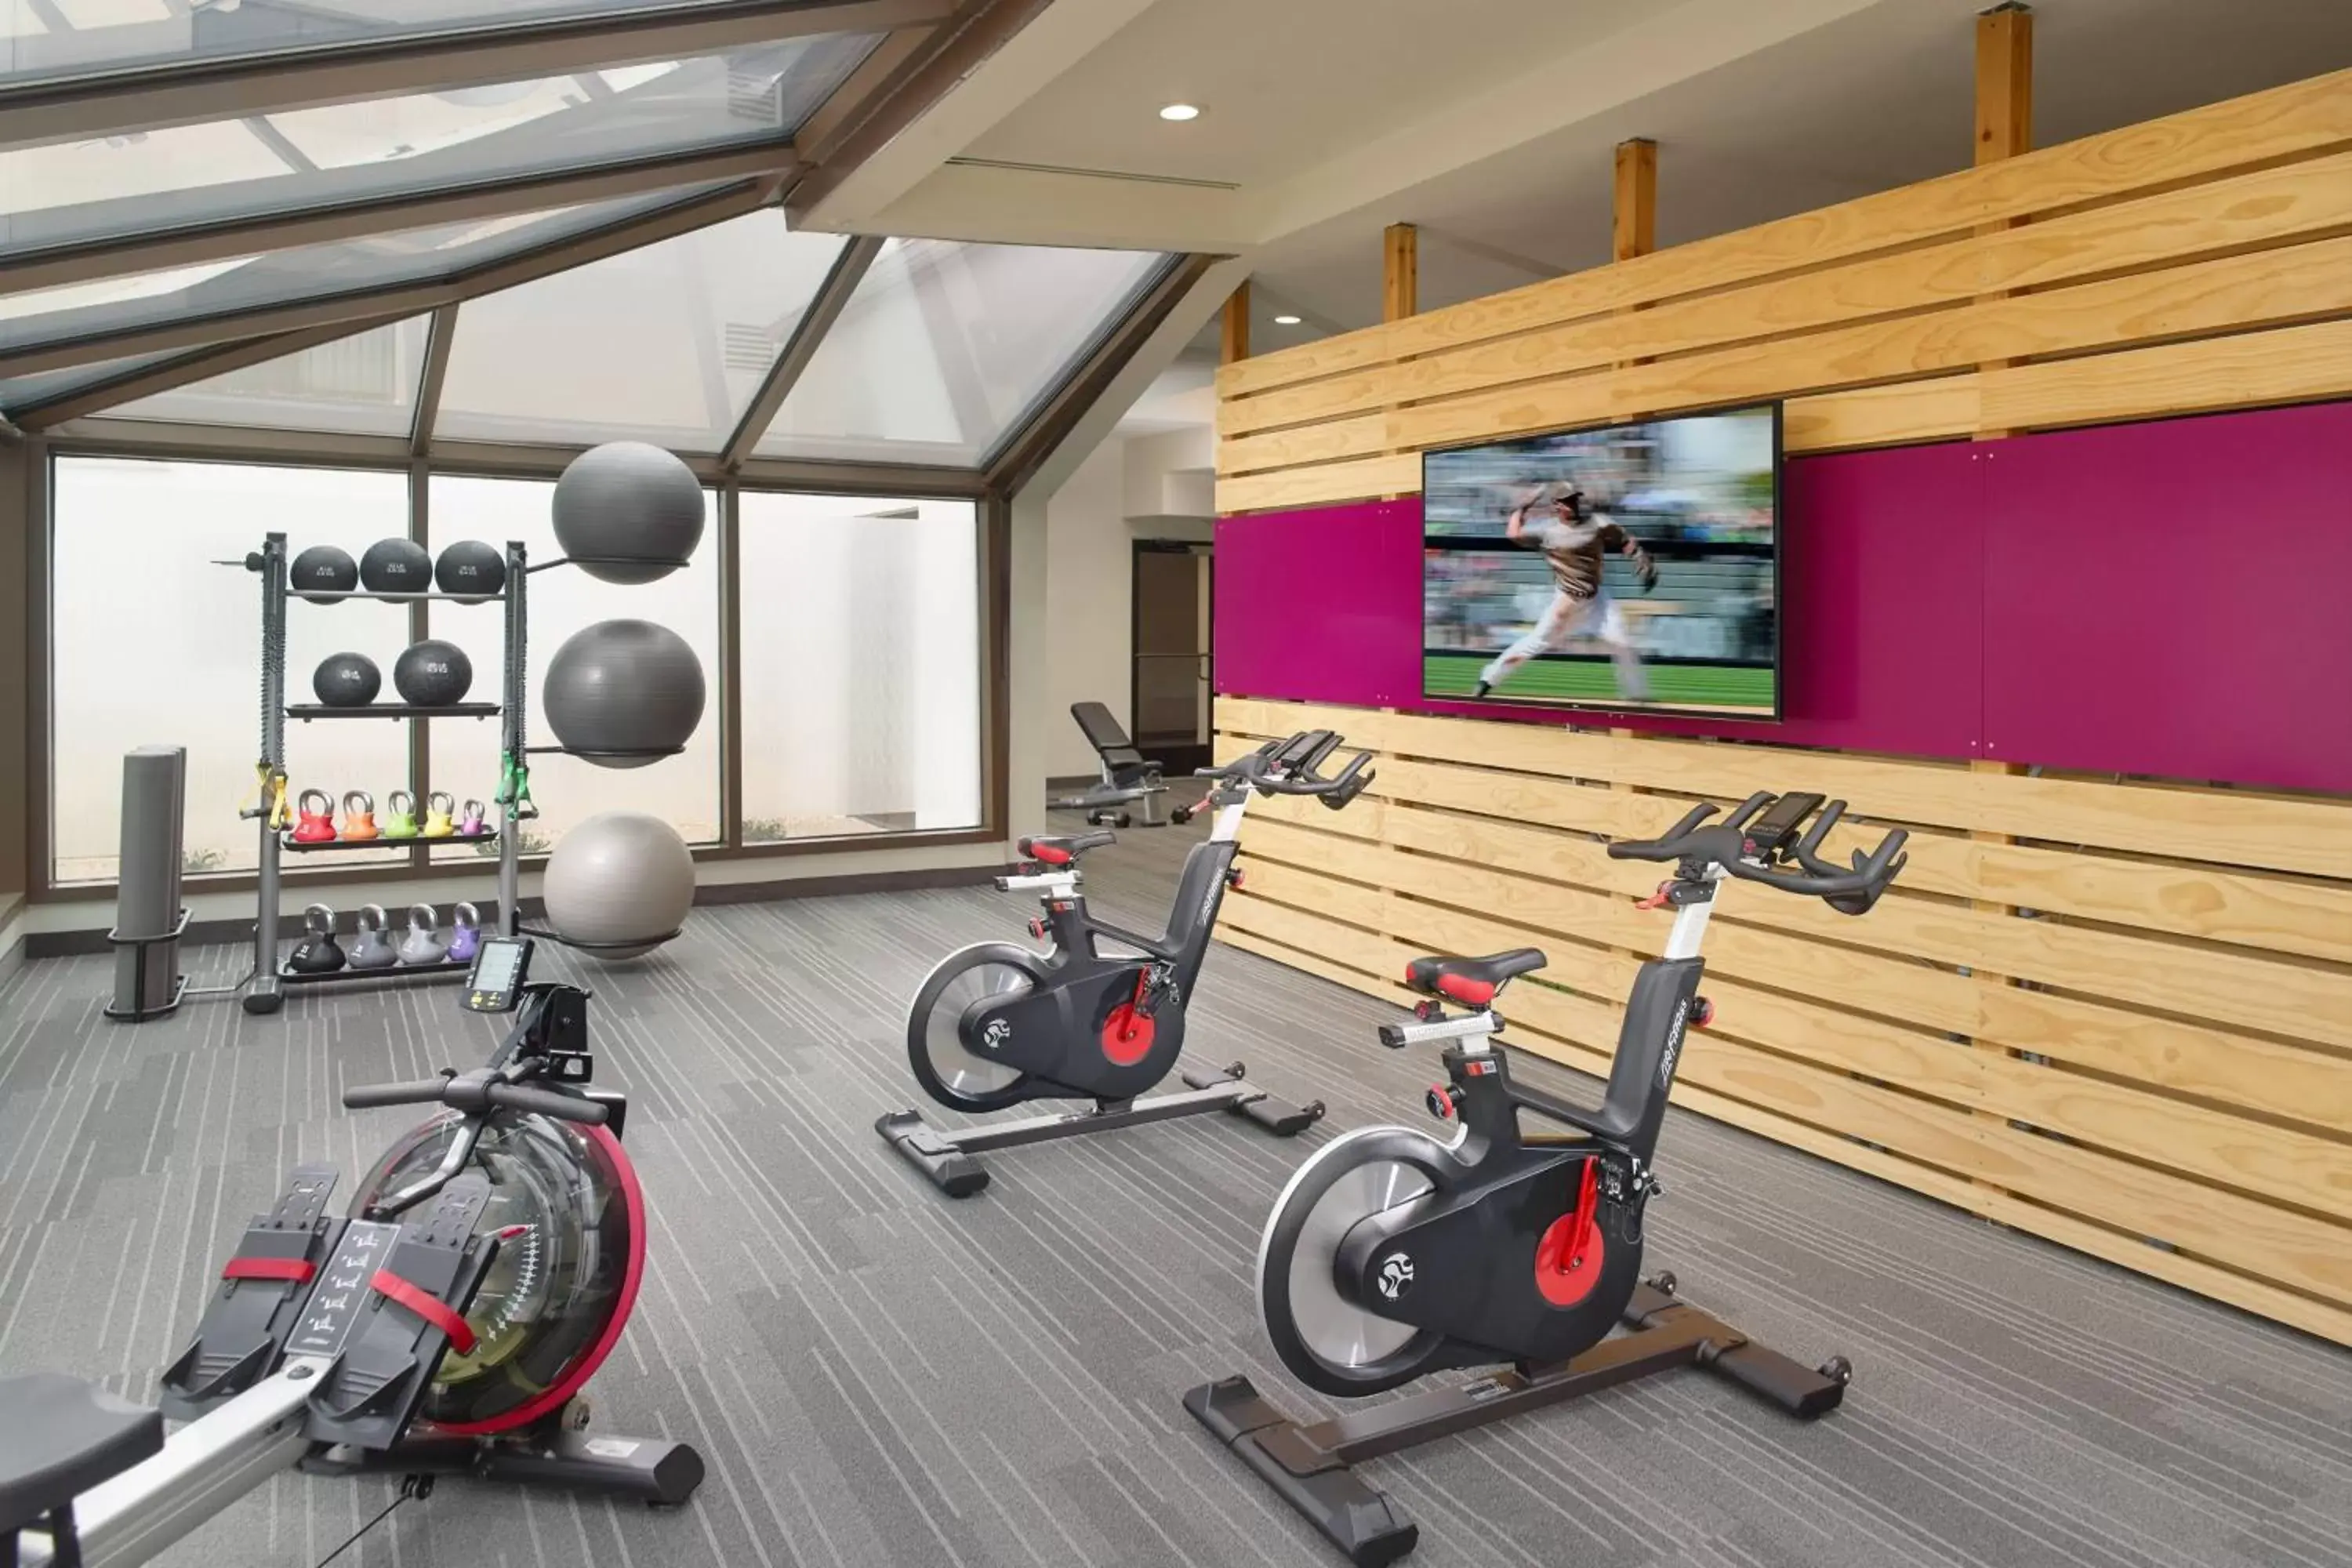 Fitness centre/facilities, Fitness Center/Facilities in Courtyard by Marriott Atlanta Airport South/Sullivan Road